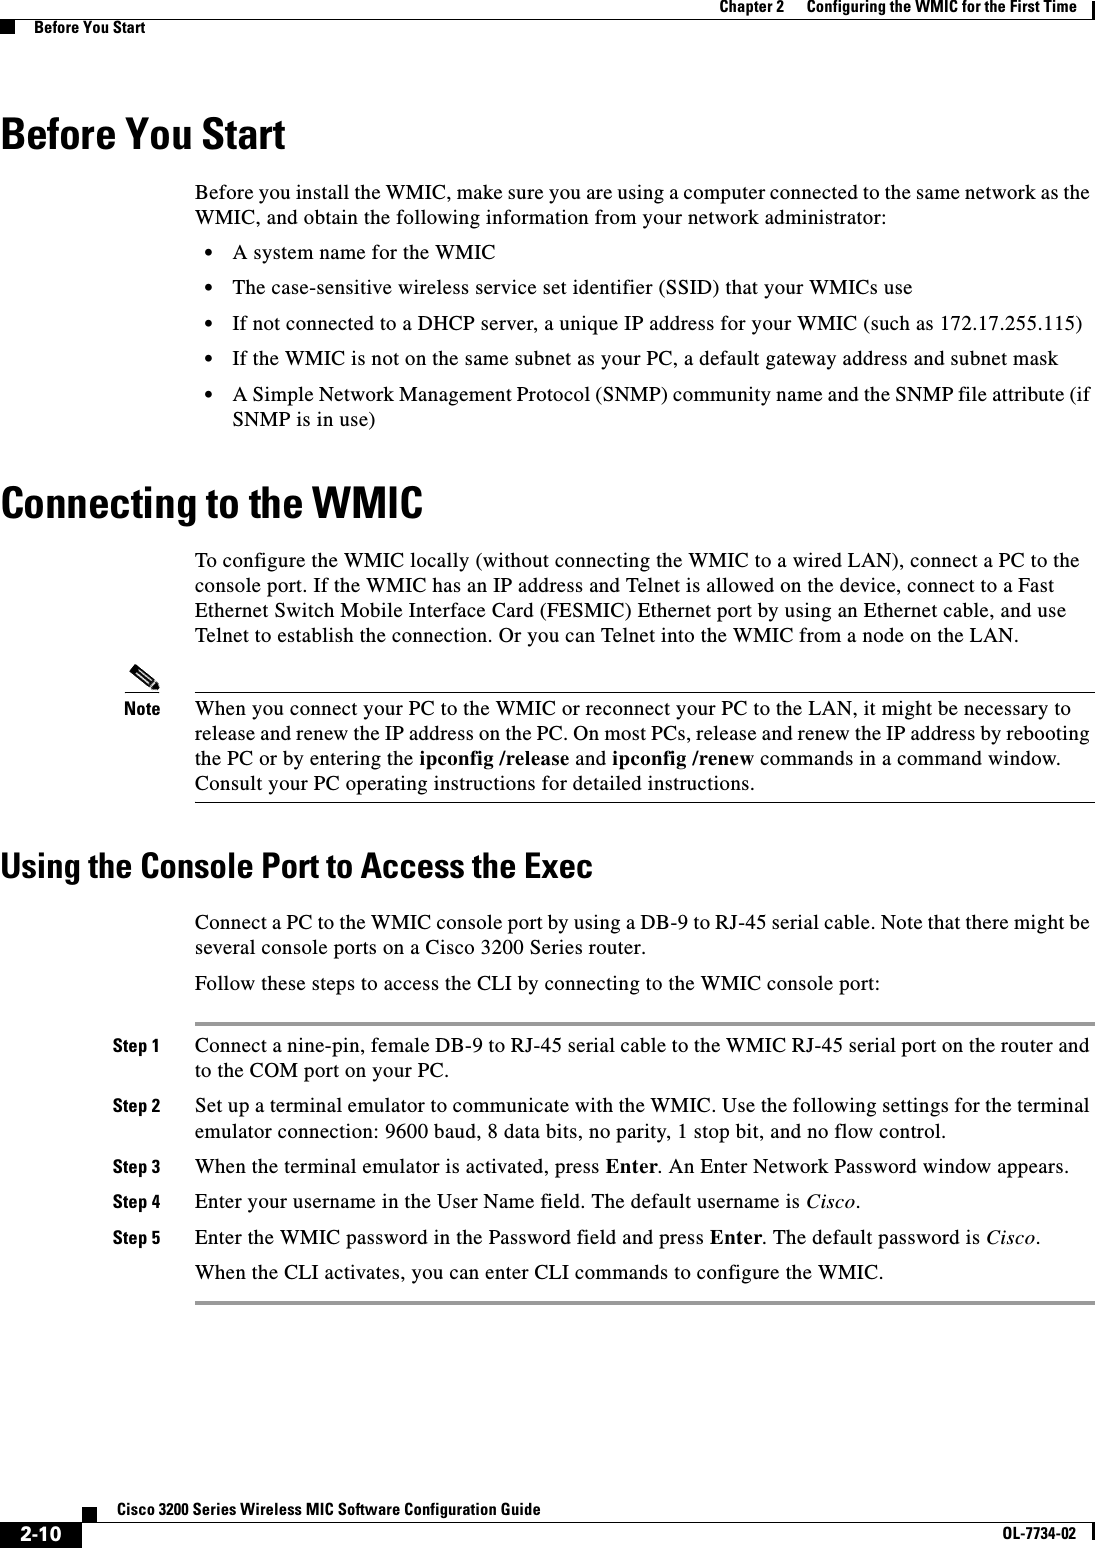 2-10Cisco 3200 Series Wireless MIC Software Configuration GuideOL-7734-02Chapter 2      Configuring the WMIC for the First TimeBefore You StartBefore You StartBefore you install the WMIC, make sure you are using a computer connected to the same network as the WMIC, and obtain the following information from your network administrator:•A system name for the WMIC•The case-sensitive wireless service set identifier (SSID) that your WMICs use•If not connected to a DHCP server, a unique IP address for your WMIC (such as 172.17.255.115)•If the WMIC is not on the same subnet as your PC, a default gateway address and subnet mask•A Simple Network Management Protocol (SNMP) community name and the SNMP file attribute (if SNMP is in use)Connecting to the WMIC To configure the WMIC locally (without connecting the WMIC to a wired LAN), connect a PC to the console port. If the WMIC has an IP address and Telnet is allowed on the device, connect to a Fast Ethernet Switch Mobile Interface Card (FESMIC) Ethernet port by using an Ethernet cable, and use Telnet to establish the connection. Or you can Telnet into the WMIC from a node on the LAN.Note When you connect your PC to the WMIC or reconnect your PC to the LAN, it might be necessary to release and renew the IP address on the PC. On most PCs, release and renew the IP address by rebooting the PC or by entering the ipconfig /release and ipconfig /renew commands in a command window. Consult your PC operating instructions for detailed instructions.Using the Console Port to Access the ExecConnect a PC to the WMIC console port by using a DB-9 to RJ-45 serial cable. Note that there might be several console ports on a Cisco 3200 Series router. Follow these steps to access the CLI by connecting to the WMIC console port: Step 1 Connect a nine-pin, female DB-9 to RJ-45 serial cable to the WMIC RJ-45 serial port on the router and to the COM port on your PC.Step 2 Set up a terminal emulator to communicate with the WMIC. Use the following settings for the terminal emulator connection: 9600 baud, 8 data bits, no parity, 1 stop bit, and no flow control.Step 3 When the terminal emulator is activated, press Enter. An Enter Network Password window appears.Step 4 Enter your username in the User Name field. The default username is Cisco.Step 5 Enter the WMIC password in the Password field and press Enter. The default password is Cisco.When the CLI activates, you can enter CLI commands to configure the WMIC. 